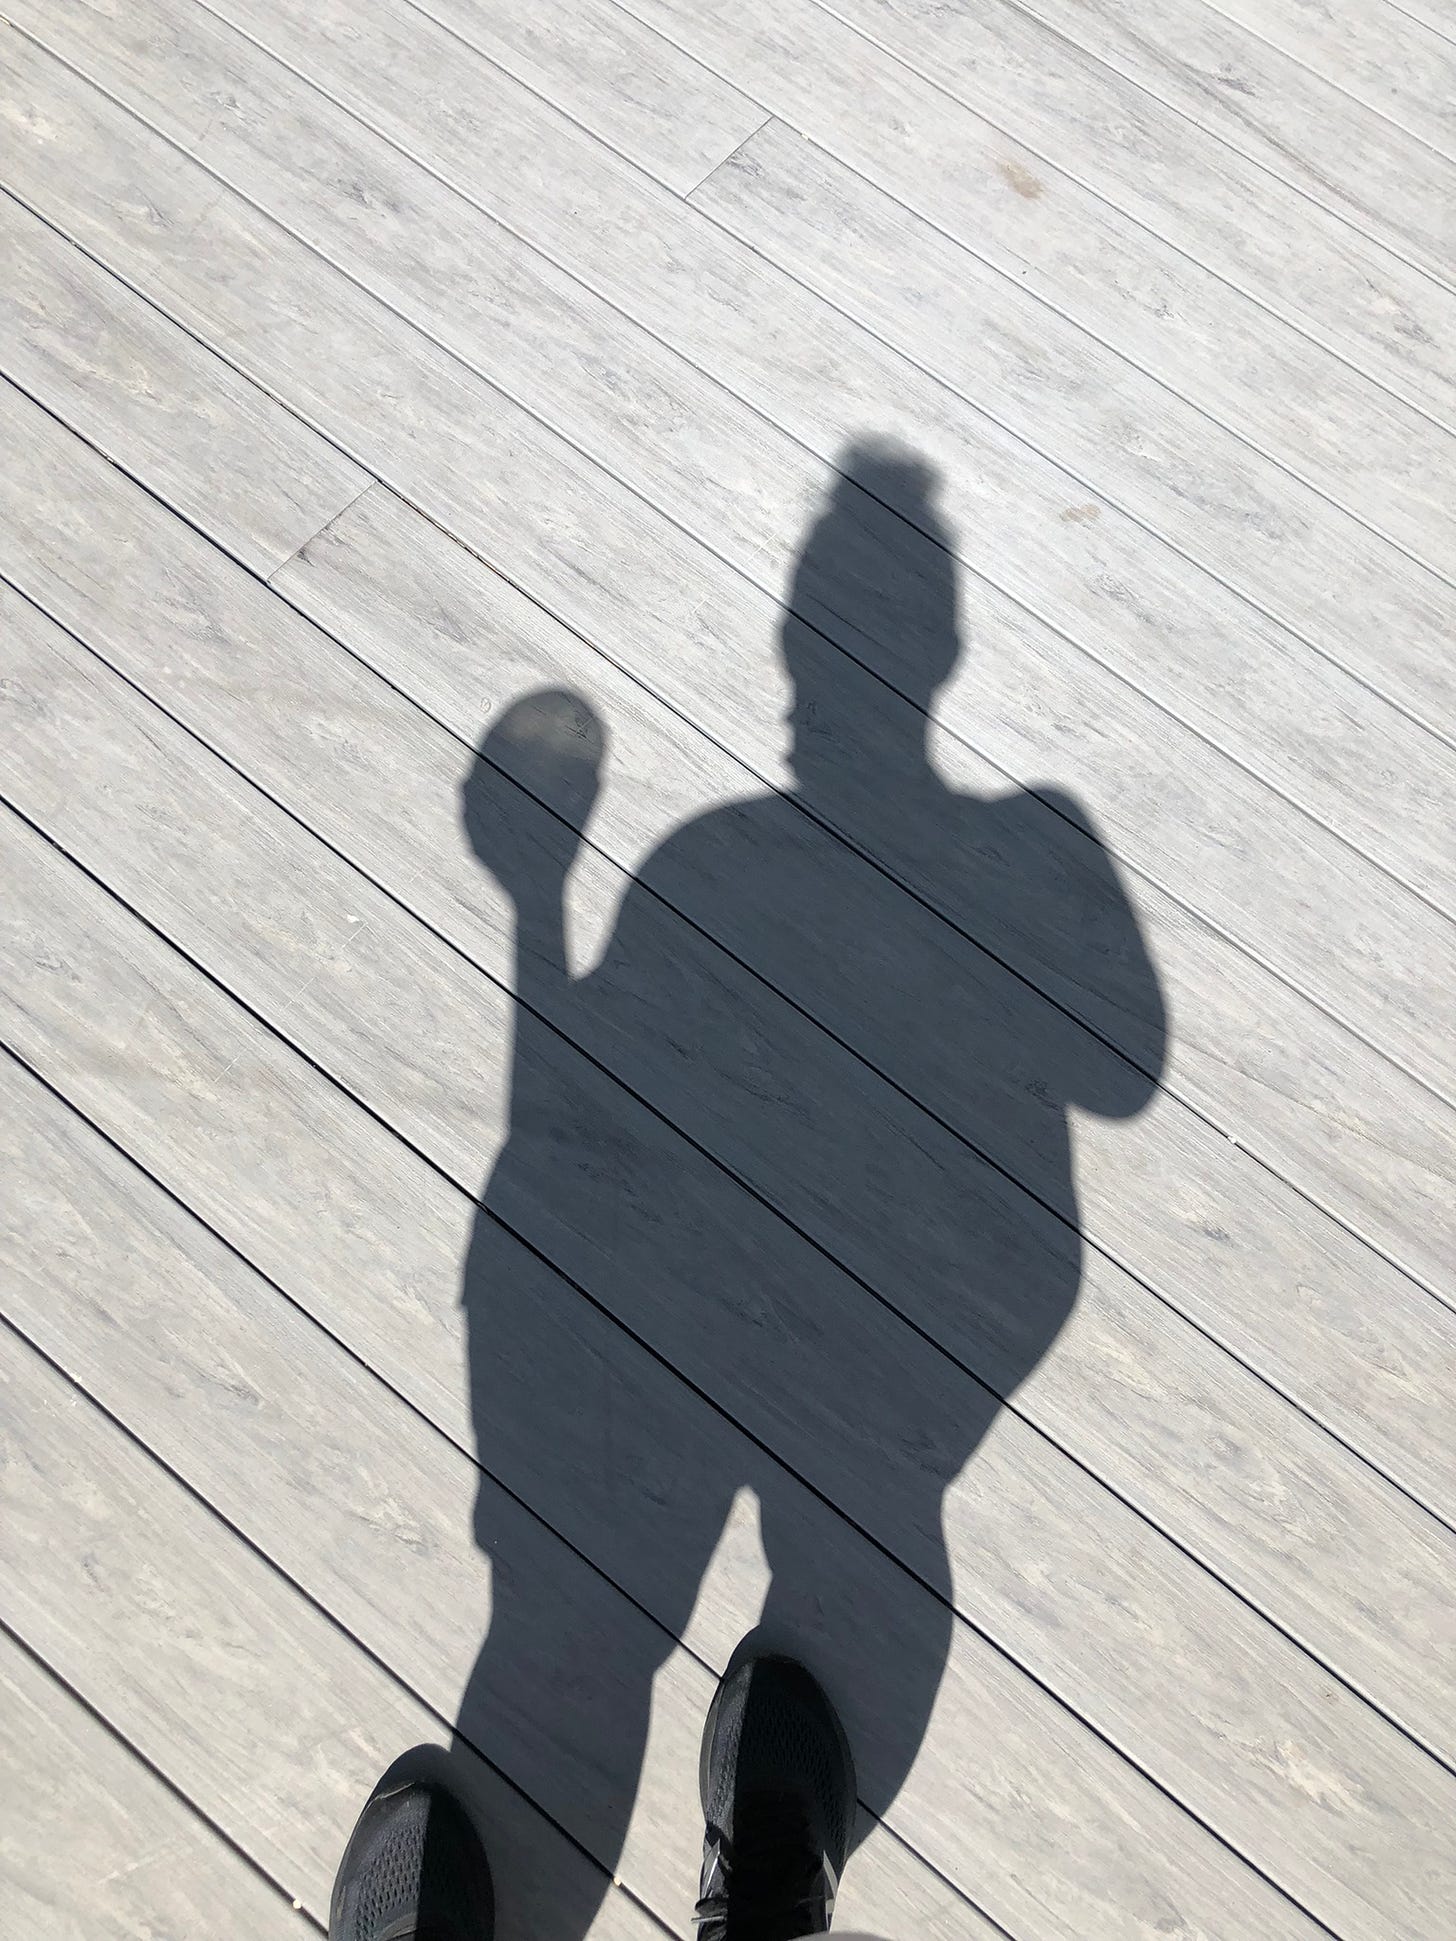 the shadow of a person cast onto a gray wood patio